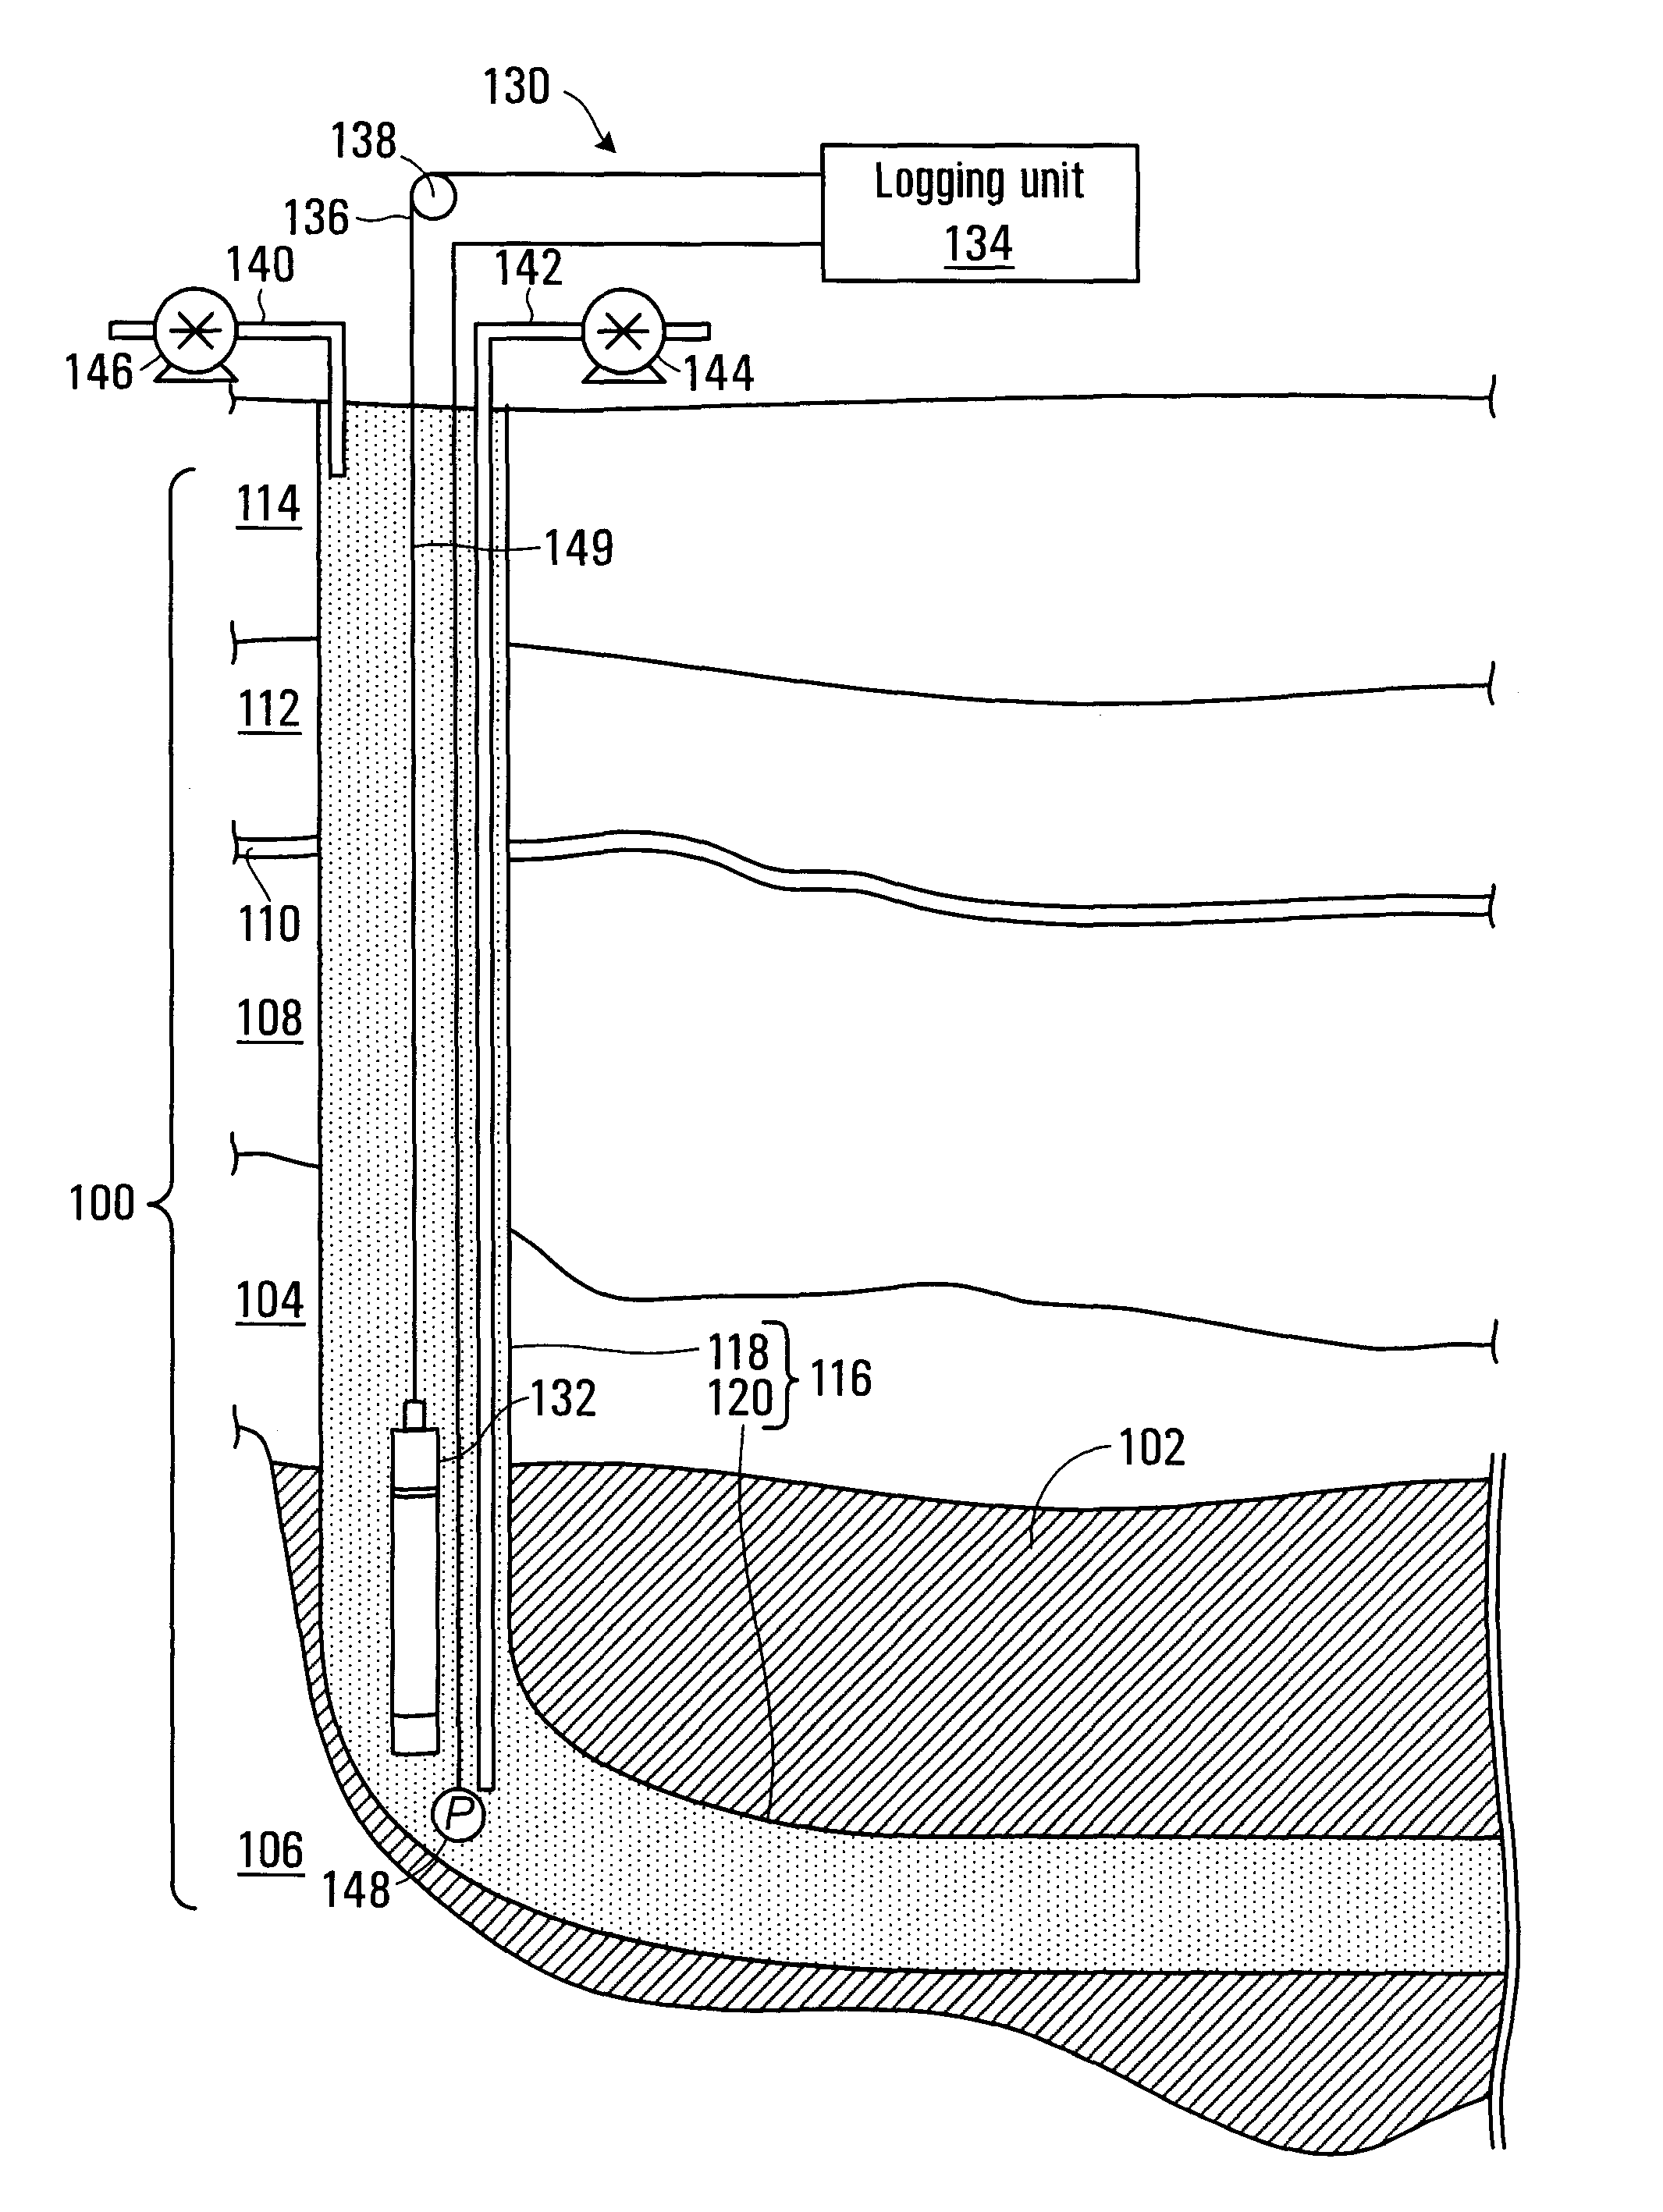 Process for determining mobile water saturation in a reservoir formation